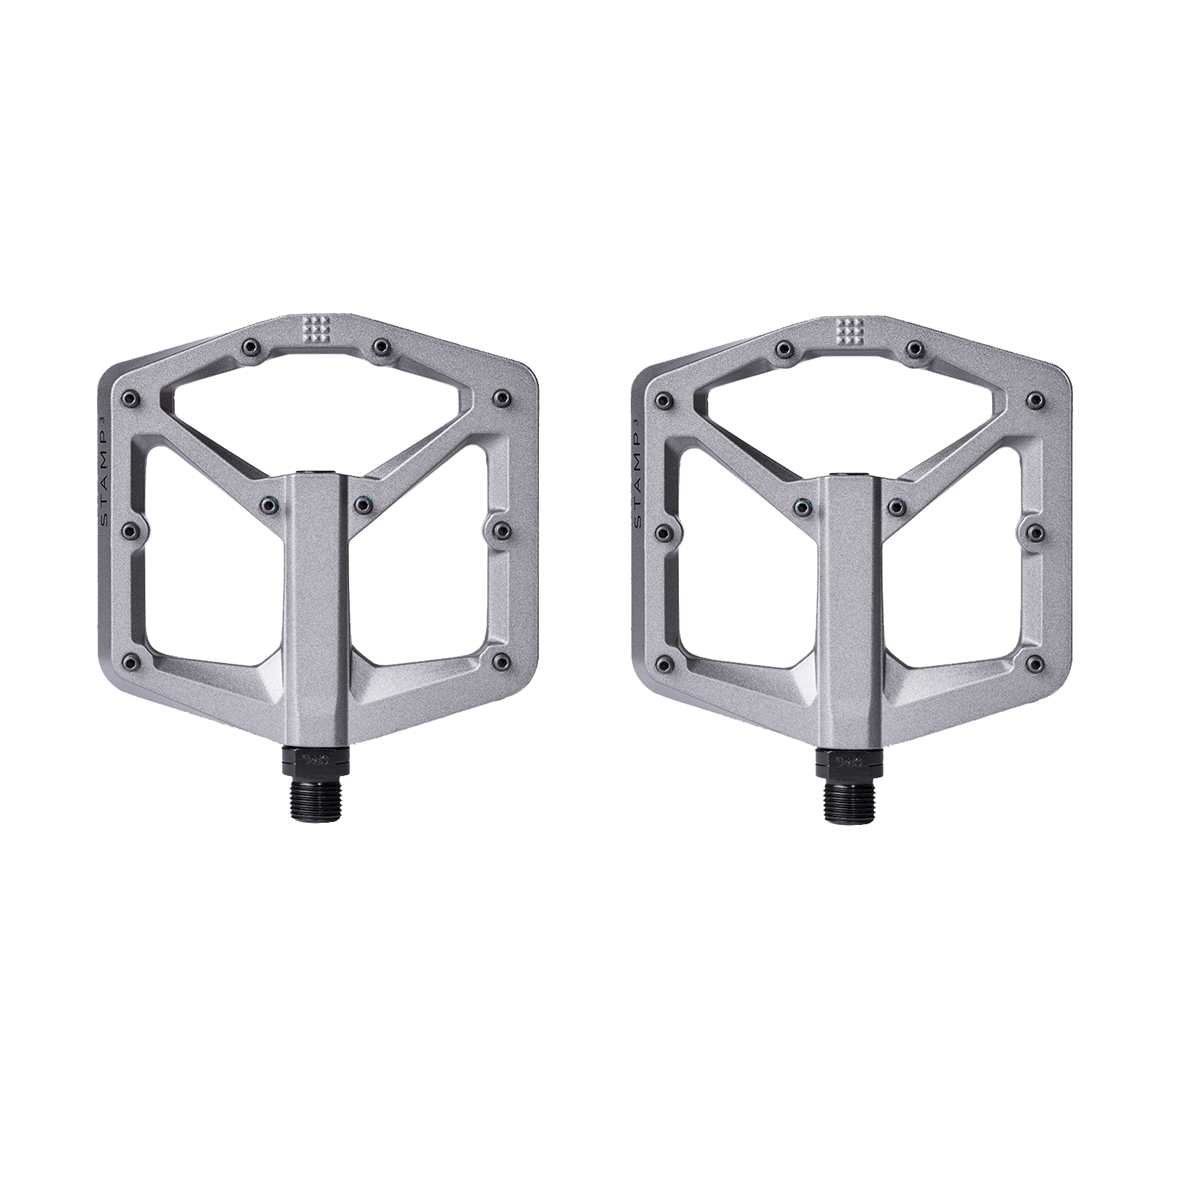 Pair of pedals Stamp 3 Large magnesium grey V2